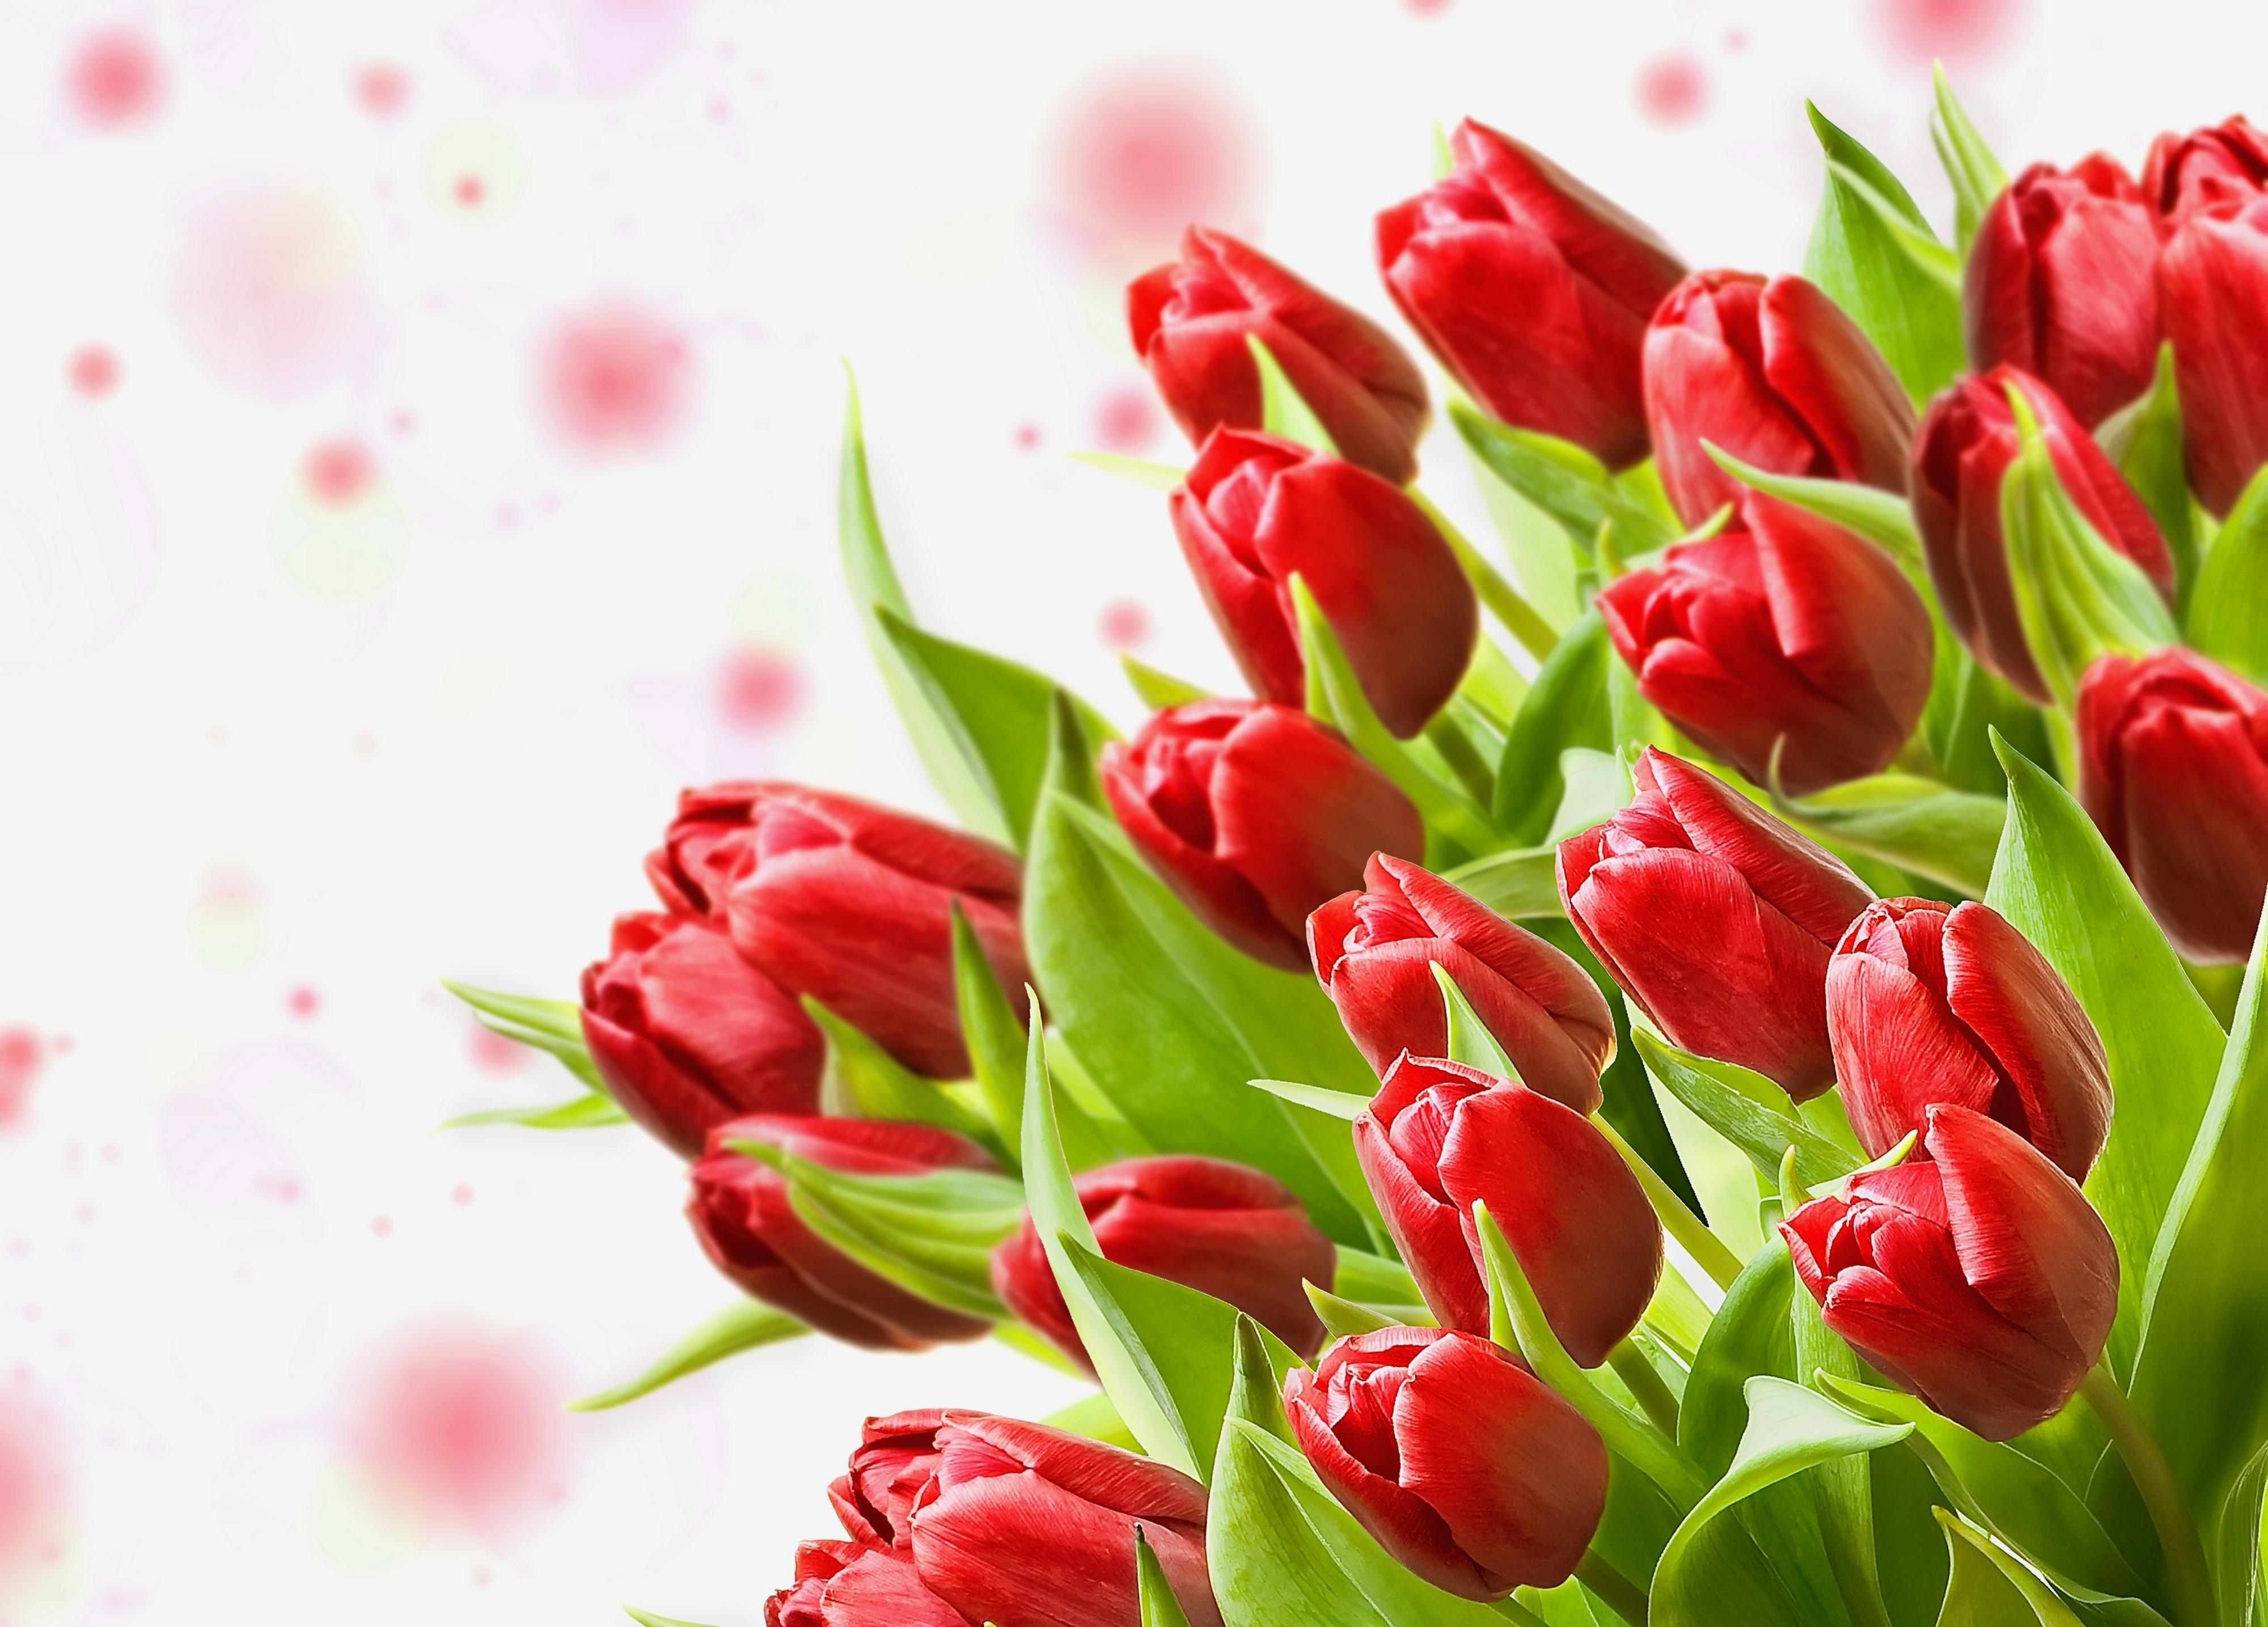 133421 download wallpaper tulips, flowers, close-up, bouquet screensavers and pictures for free